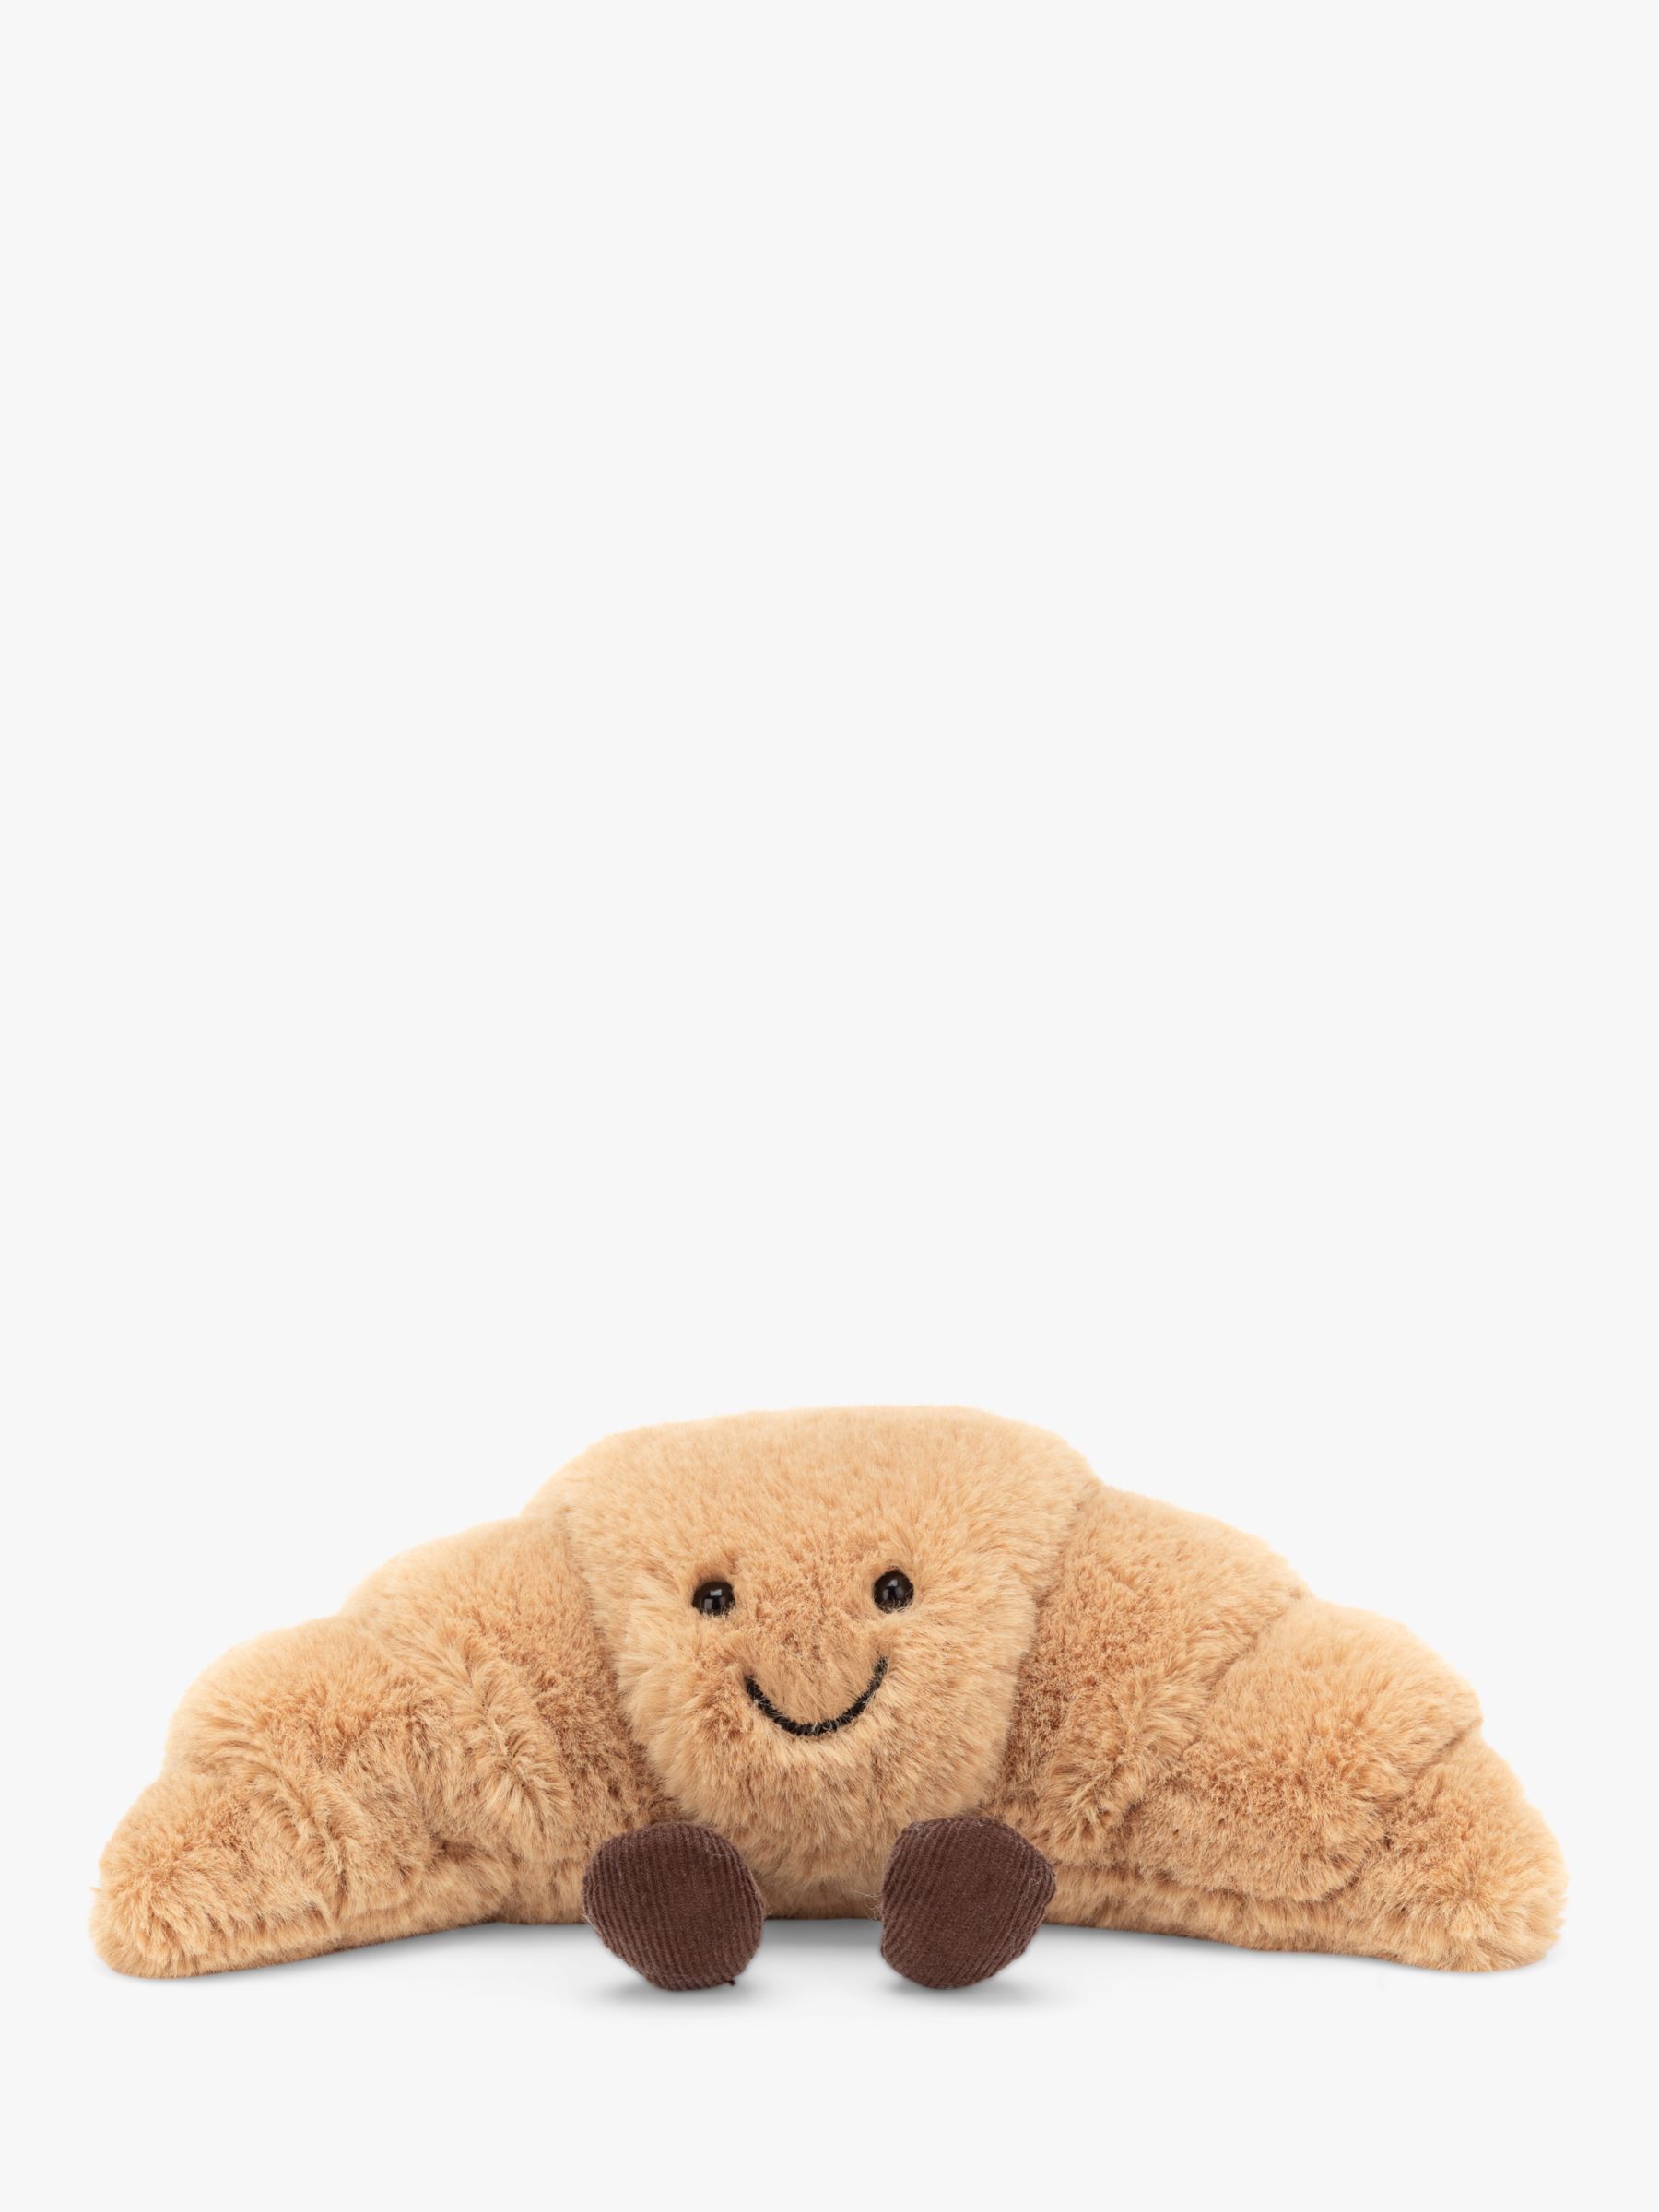 Jellycat Amuseable Croissant Soft Toy, Small, Multi